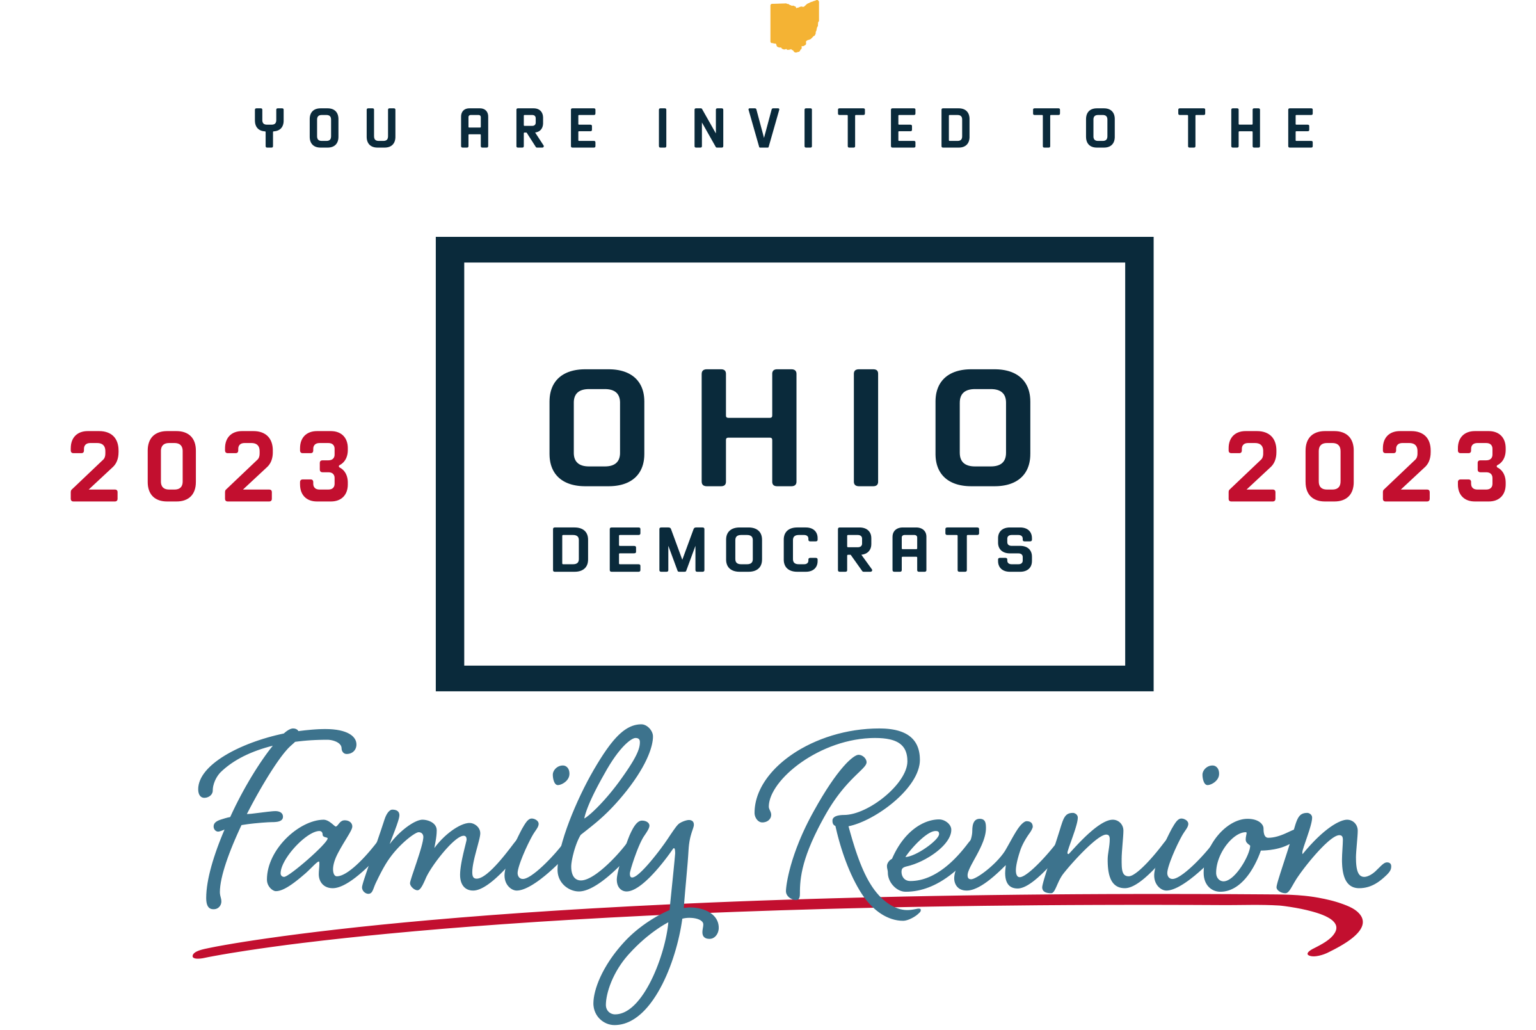 You are invited to the Ohio Democrats 2023 Family Reunion